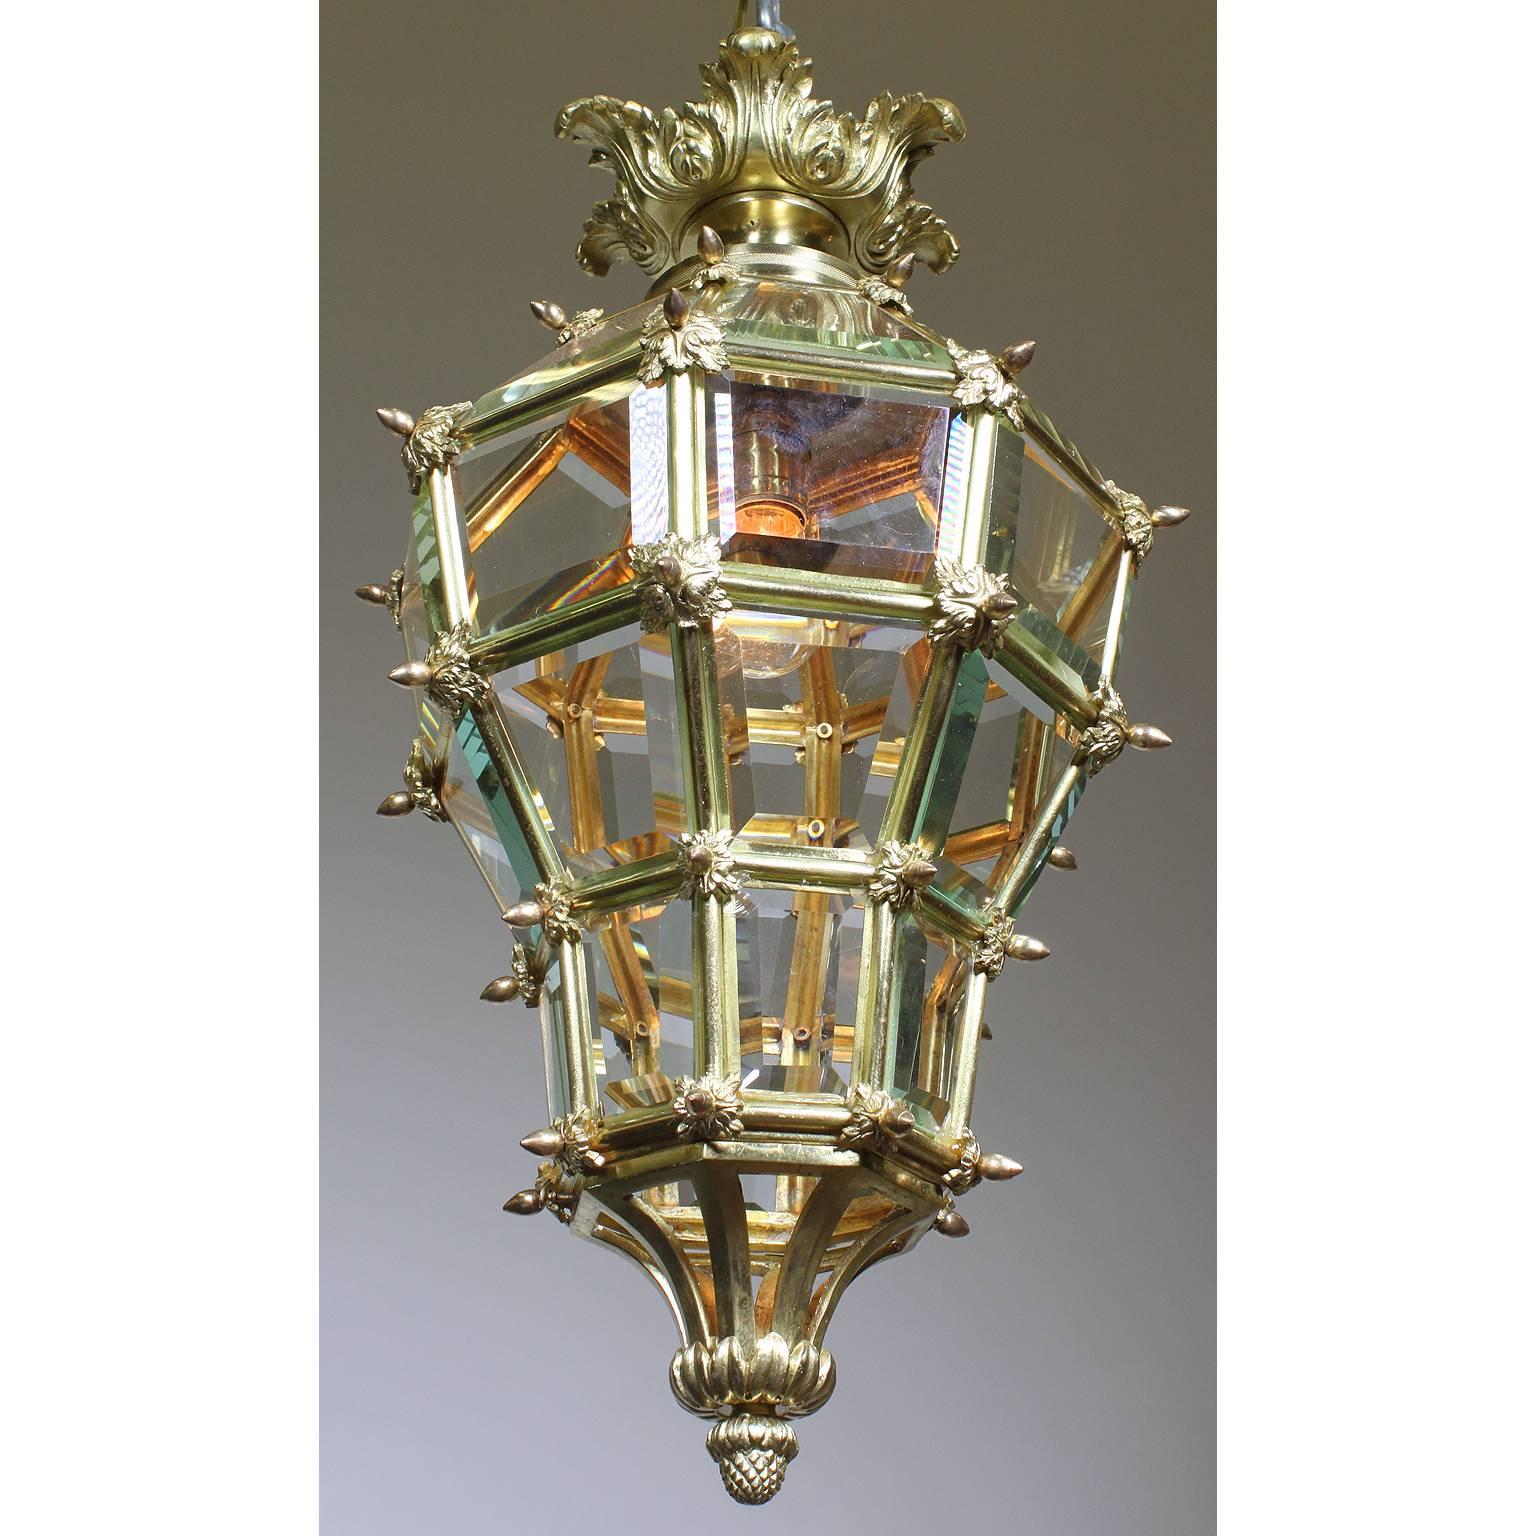 A charming French Louis XIV style early 20th century gilt bronze and paneled beveled glass 